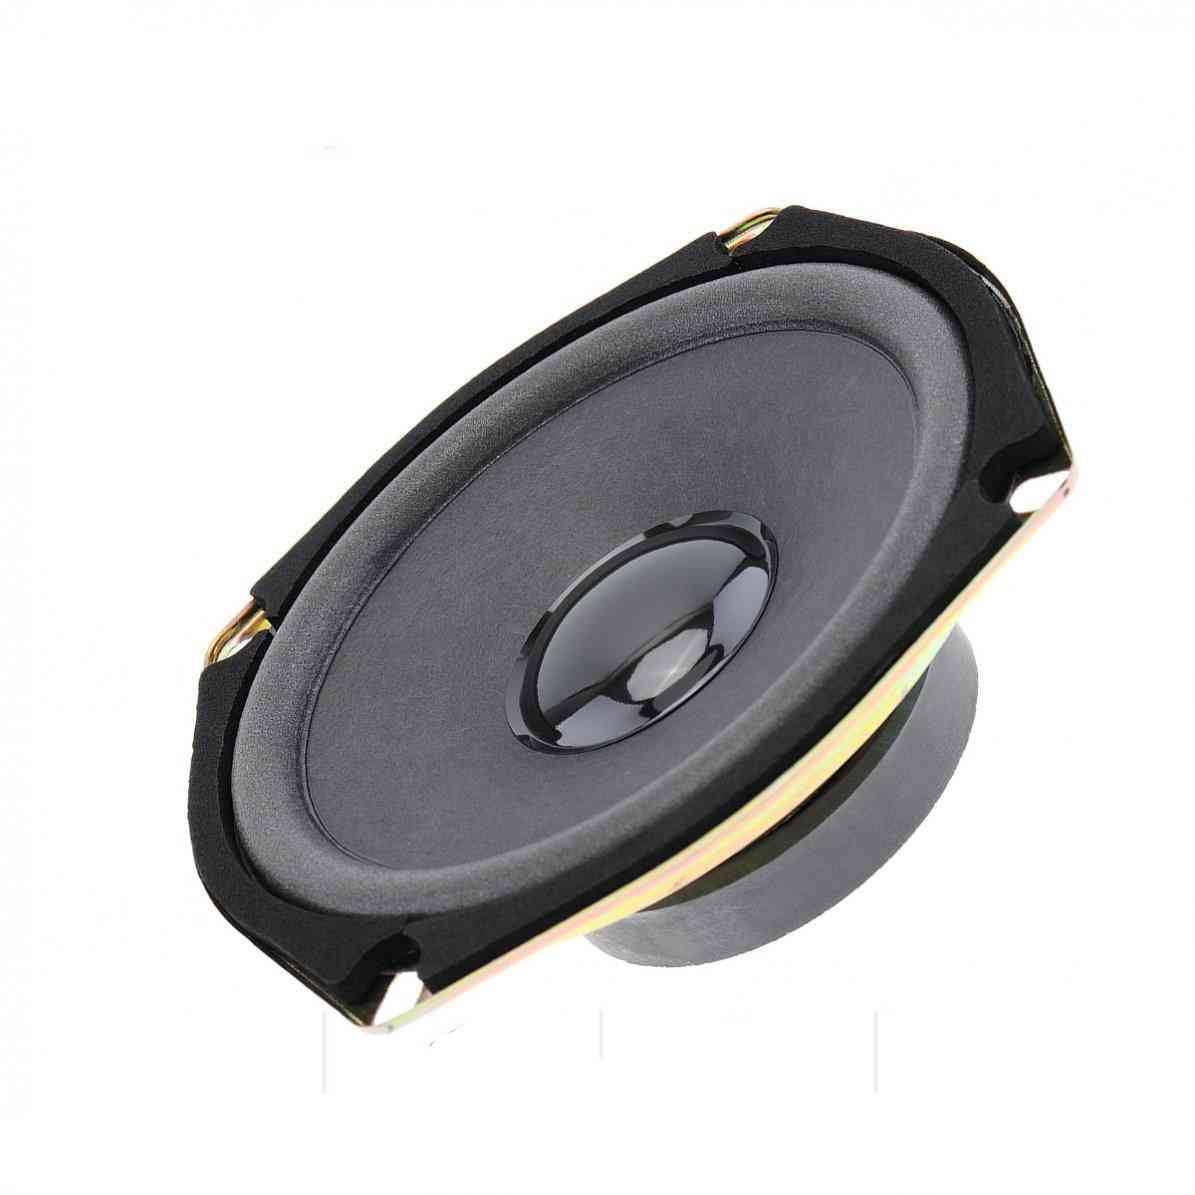 12v 300w Car Coaxial Speaker- Vehicle Door Music Stereo